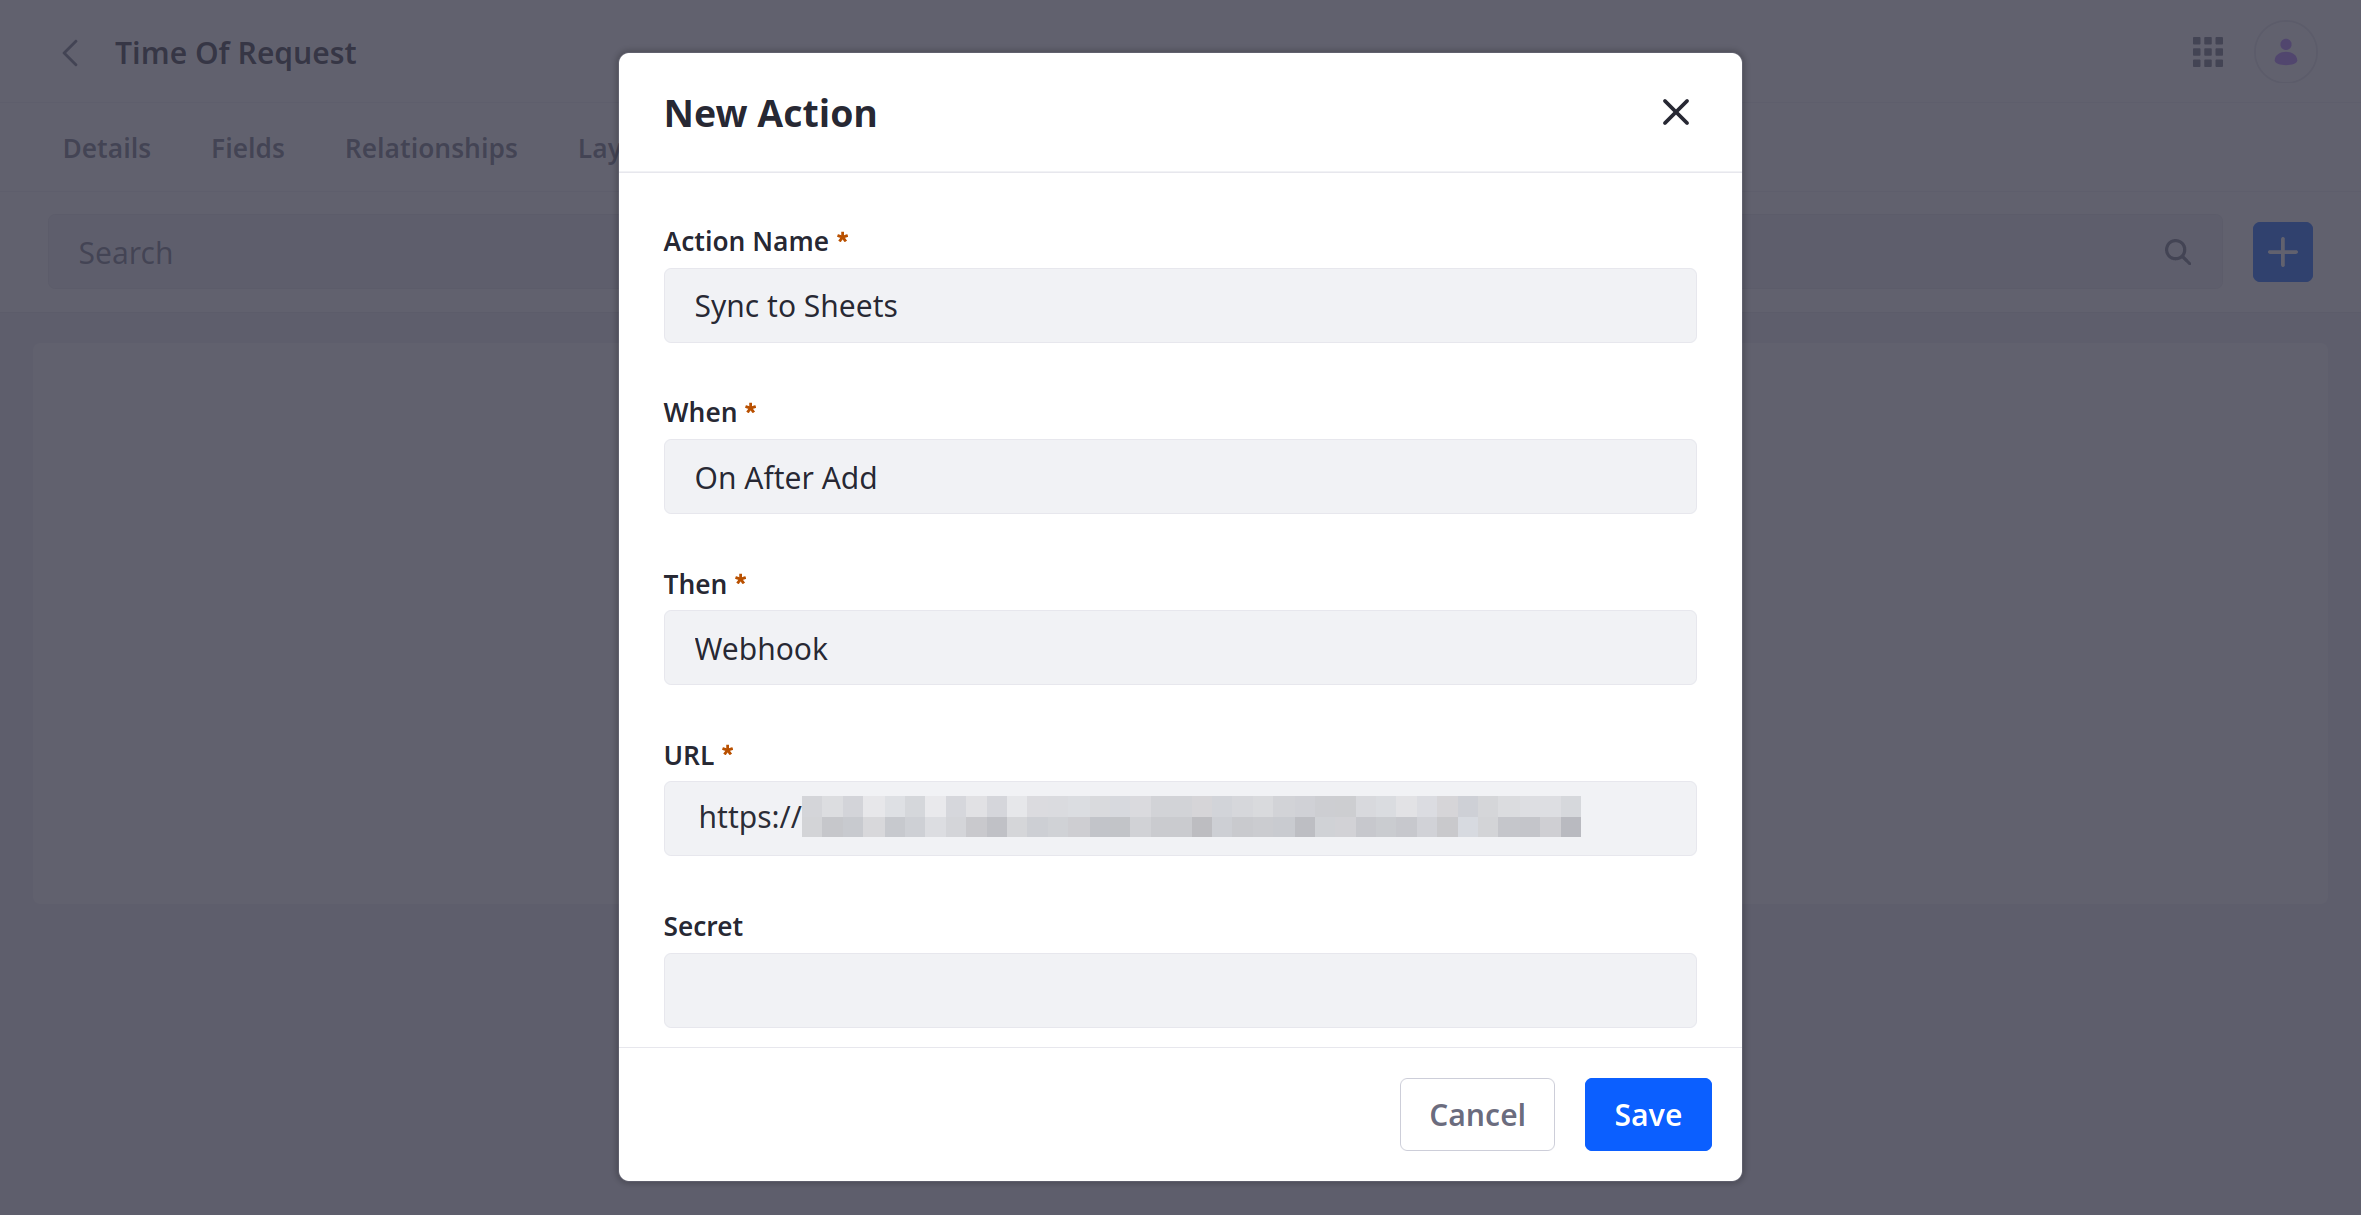 Define an action that sends a request to the webhook endpoint whenever an entry is added.